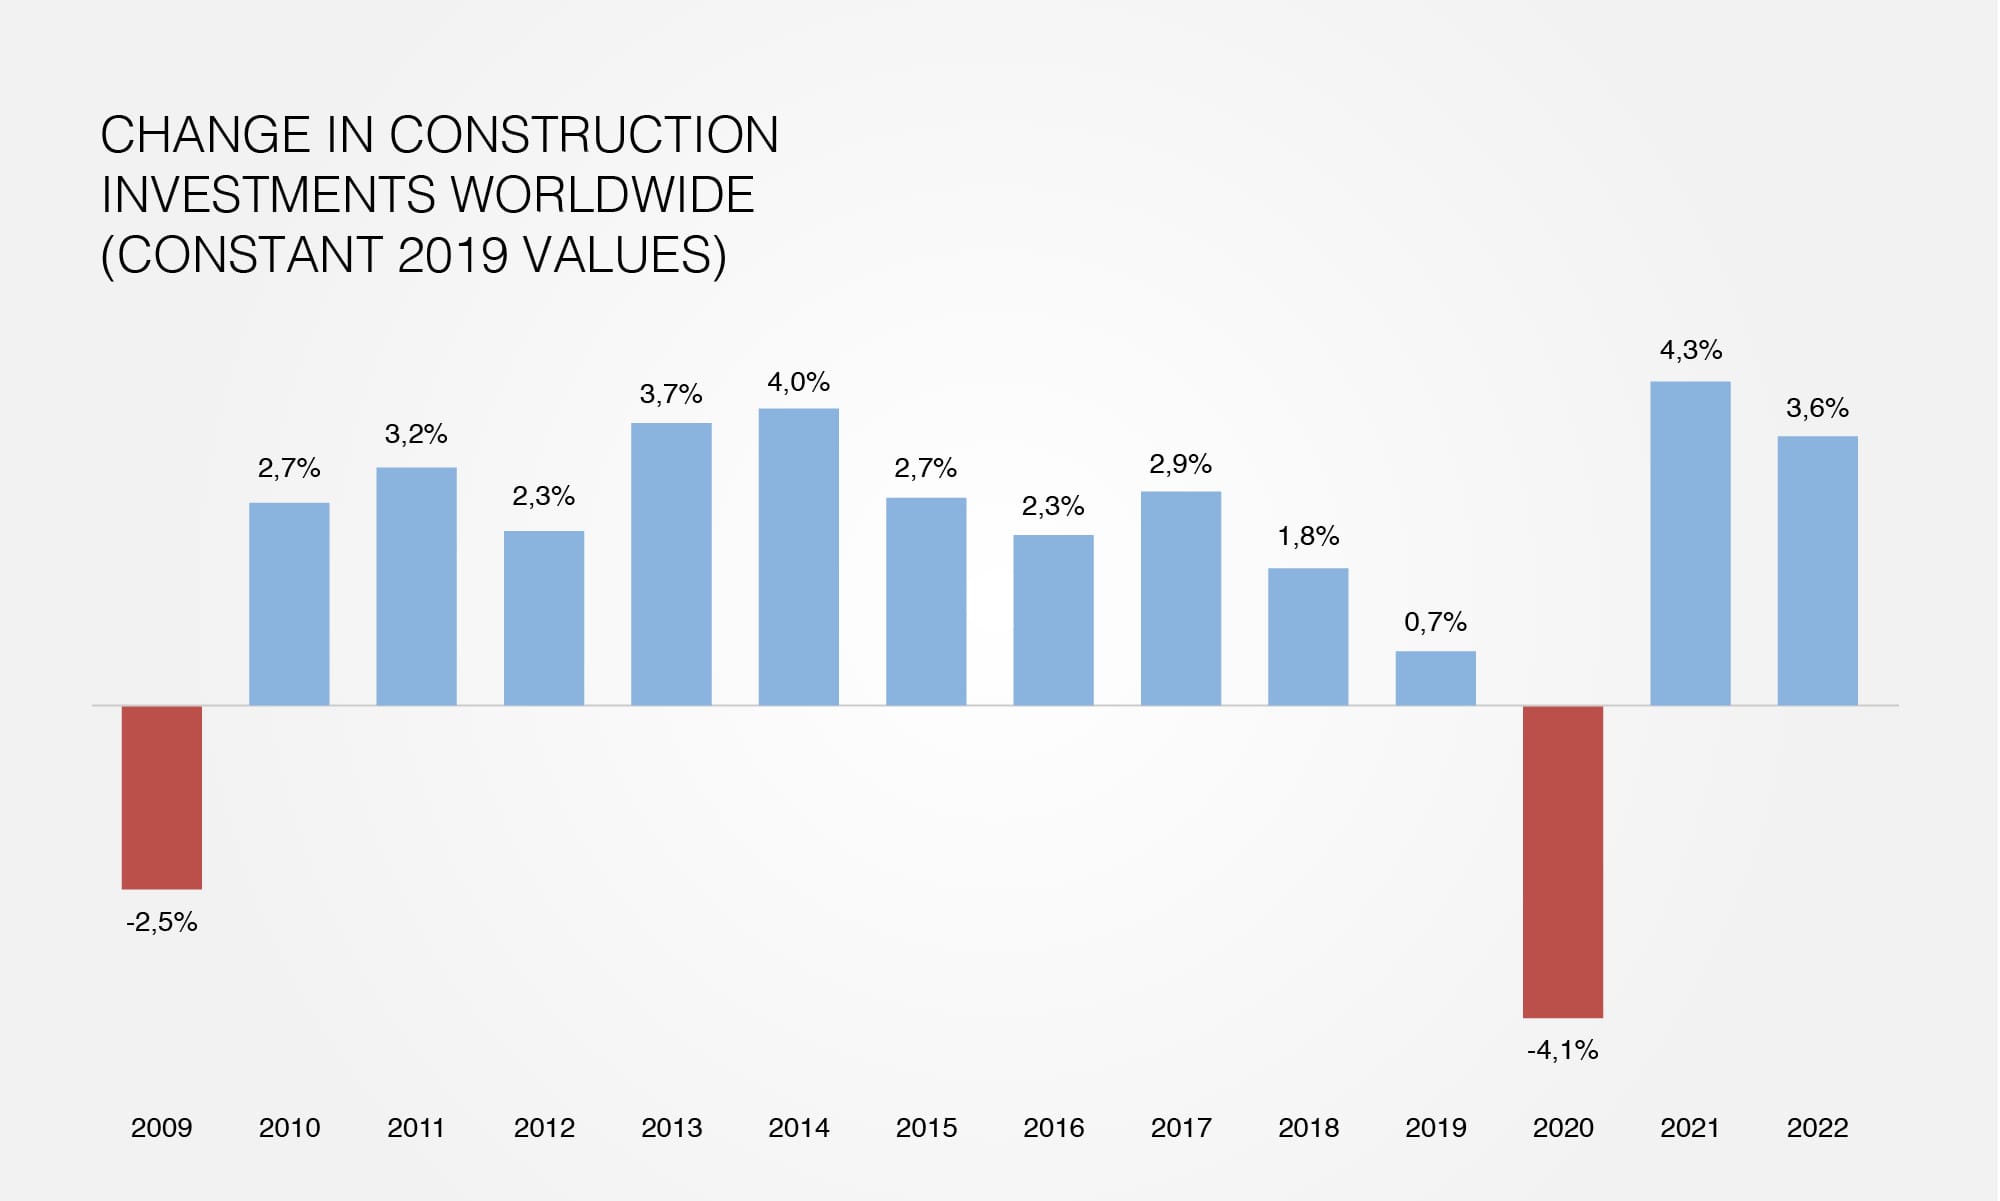 Change in construction investments worldwide (constant 2019 values)